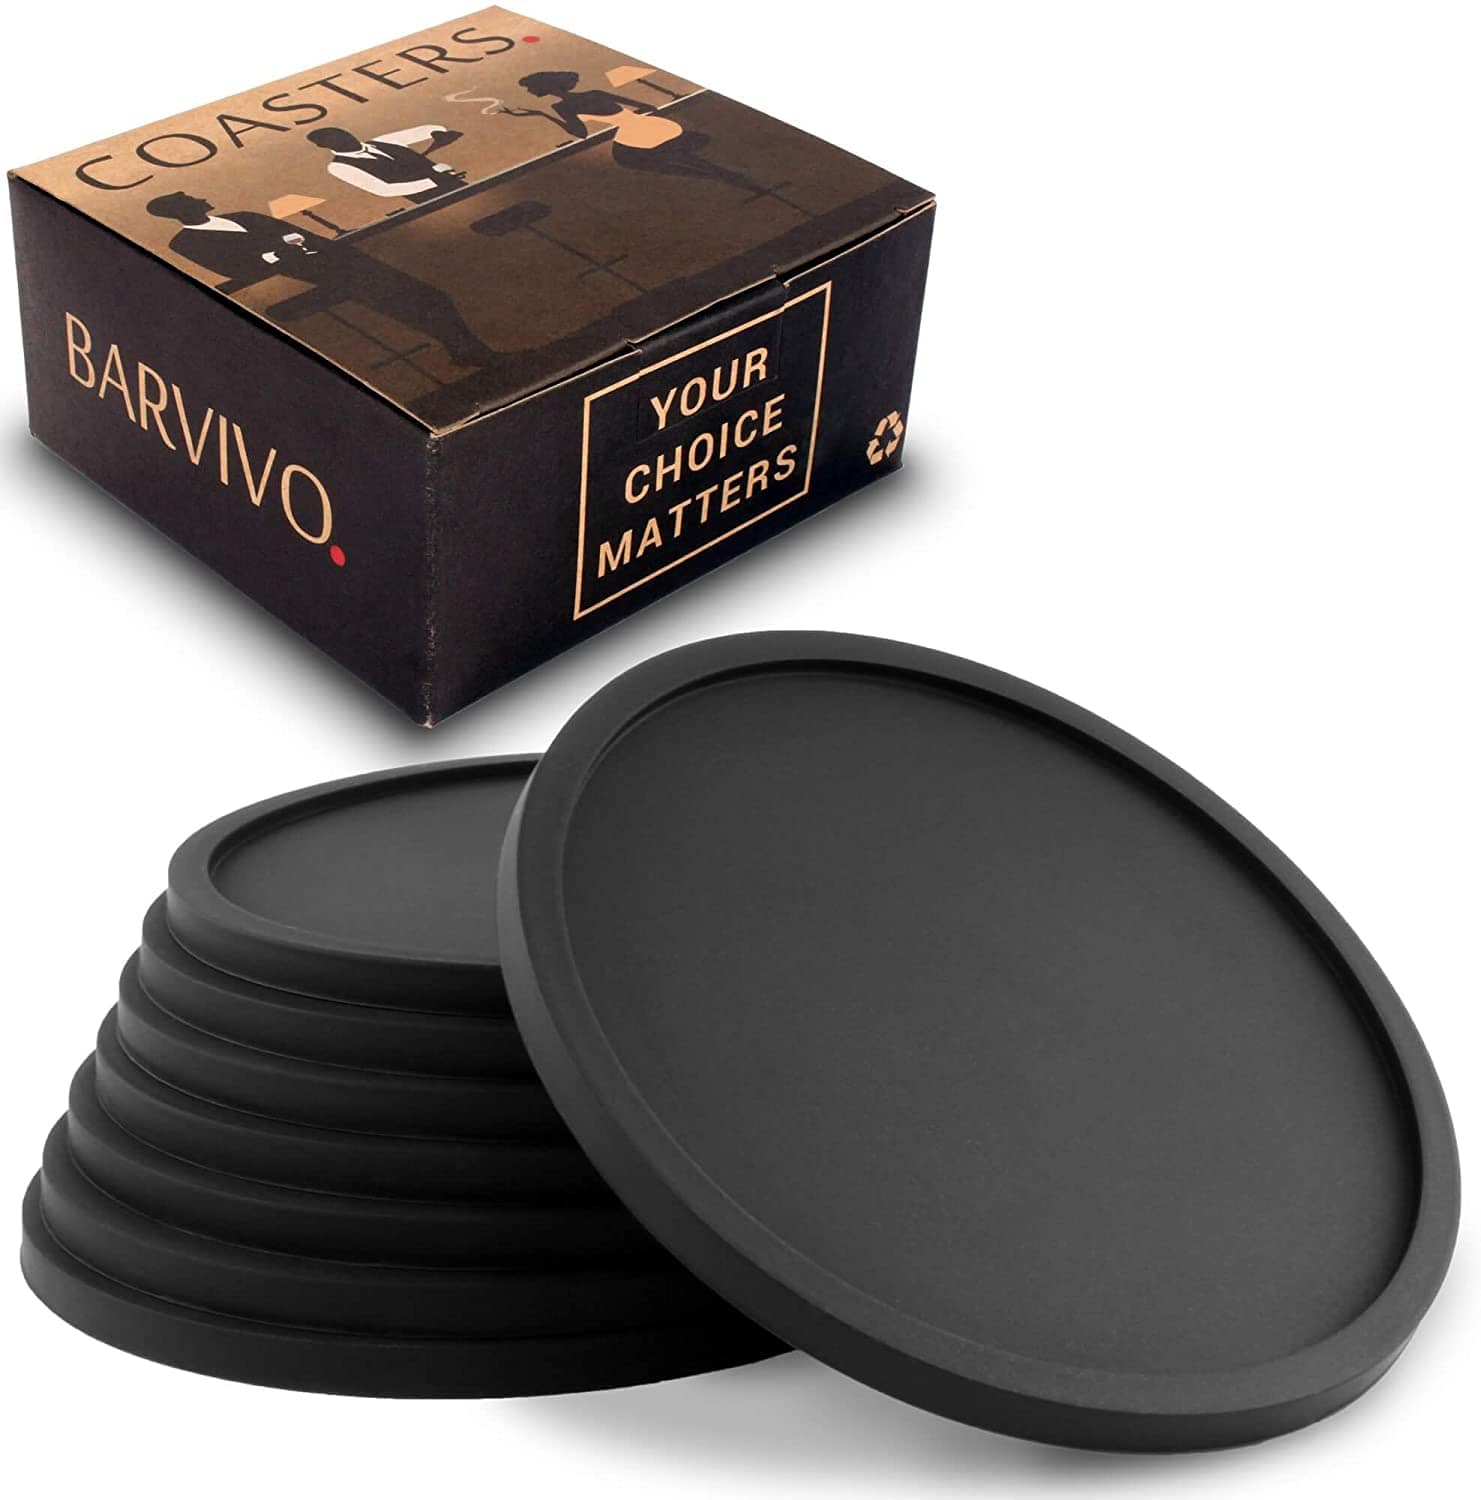 Drink Coasters by Barvivo